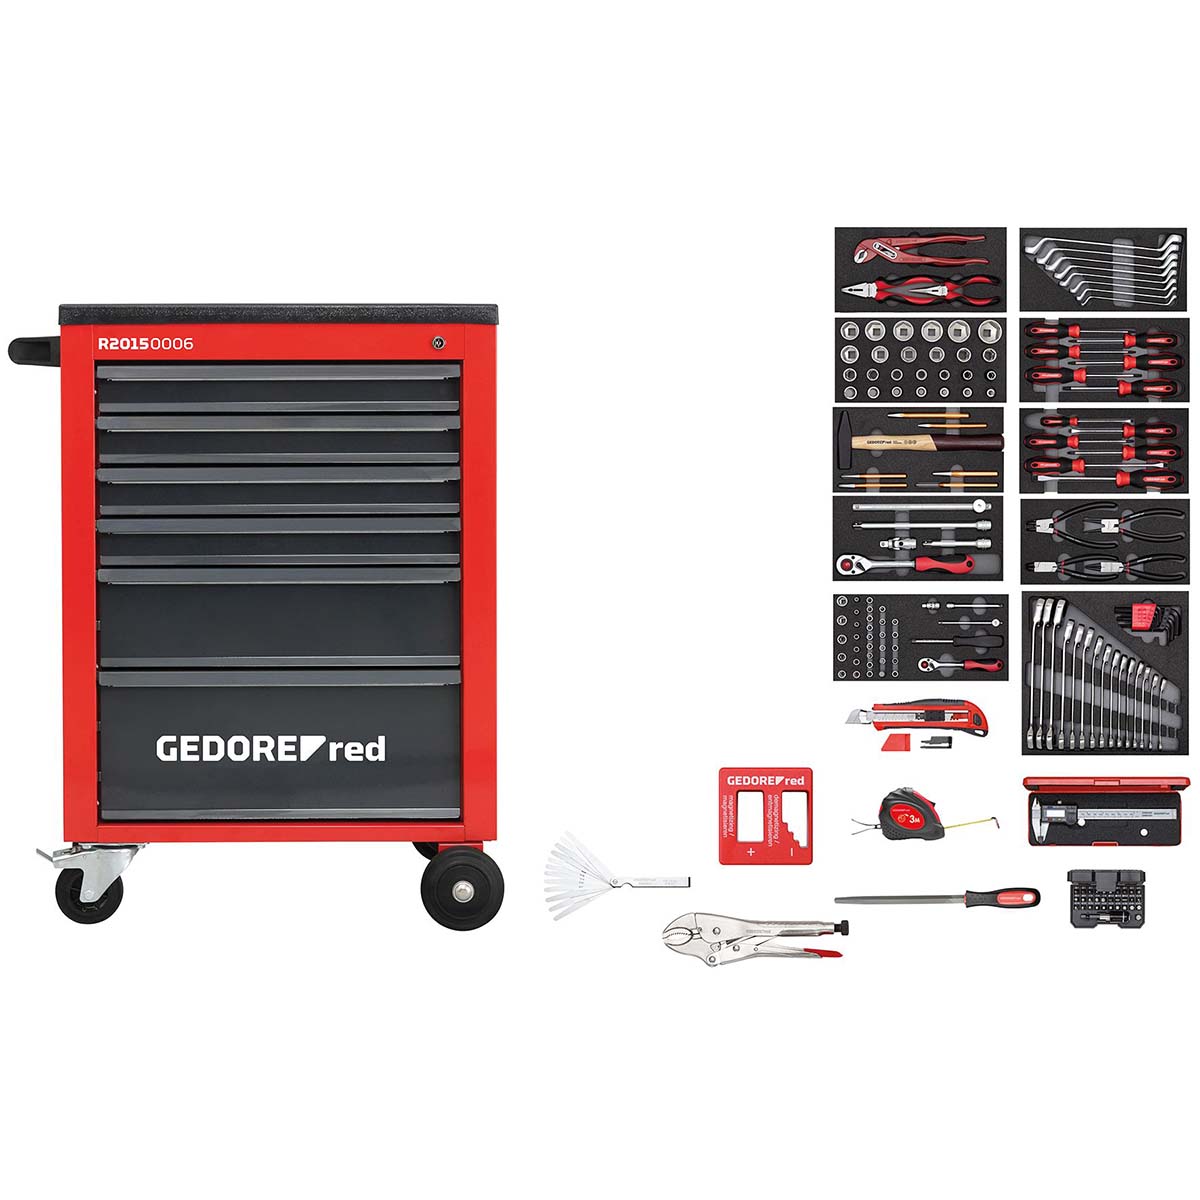 GEDORE red R21560001 - MECHANIC workshop trolley with assortment of 164 tools (3301668)